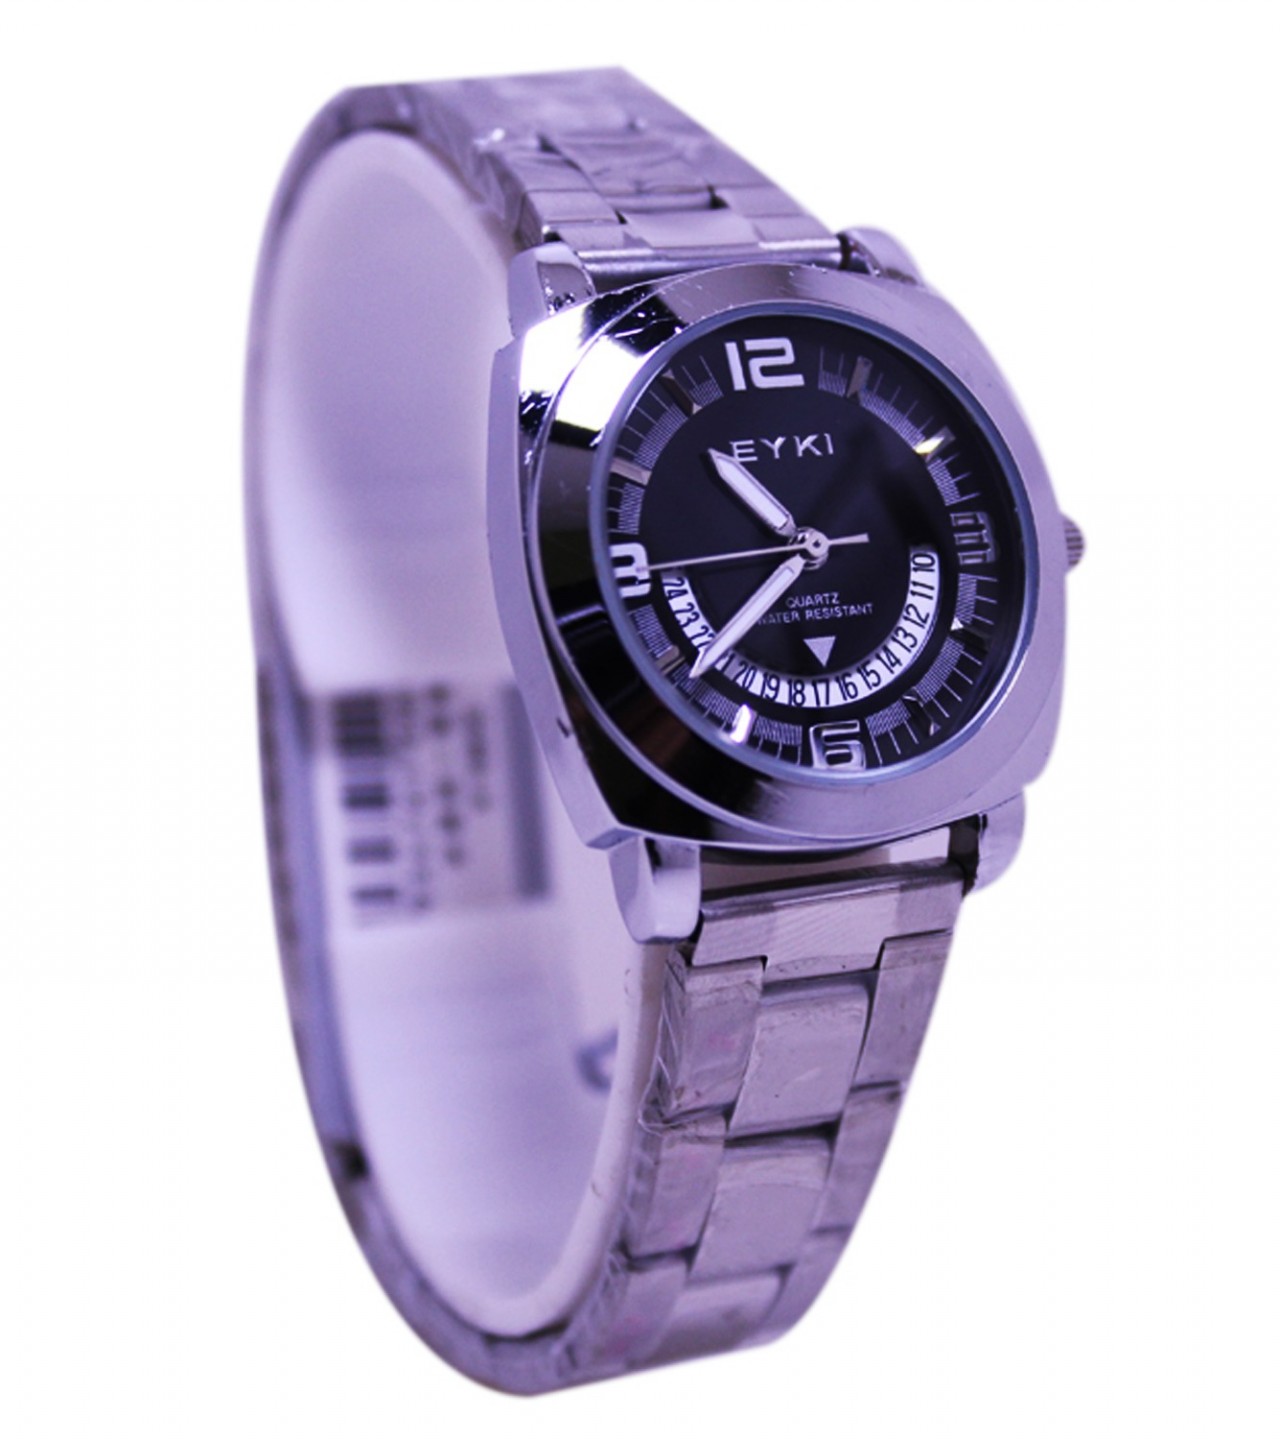 EYKI Stainless Steel Black Dial with Date Analog Watch for Women - Silver